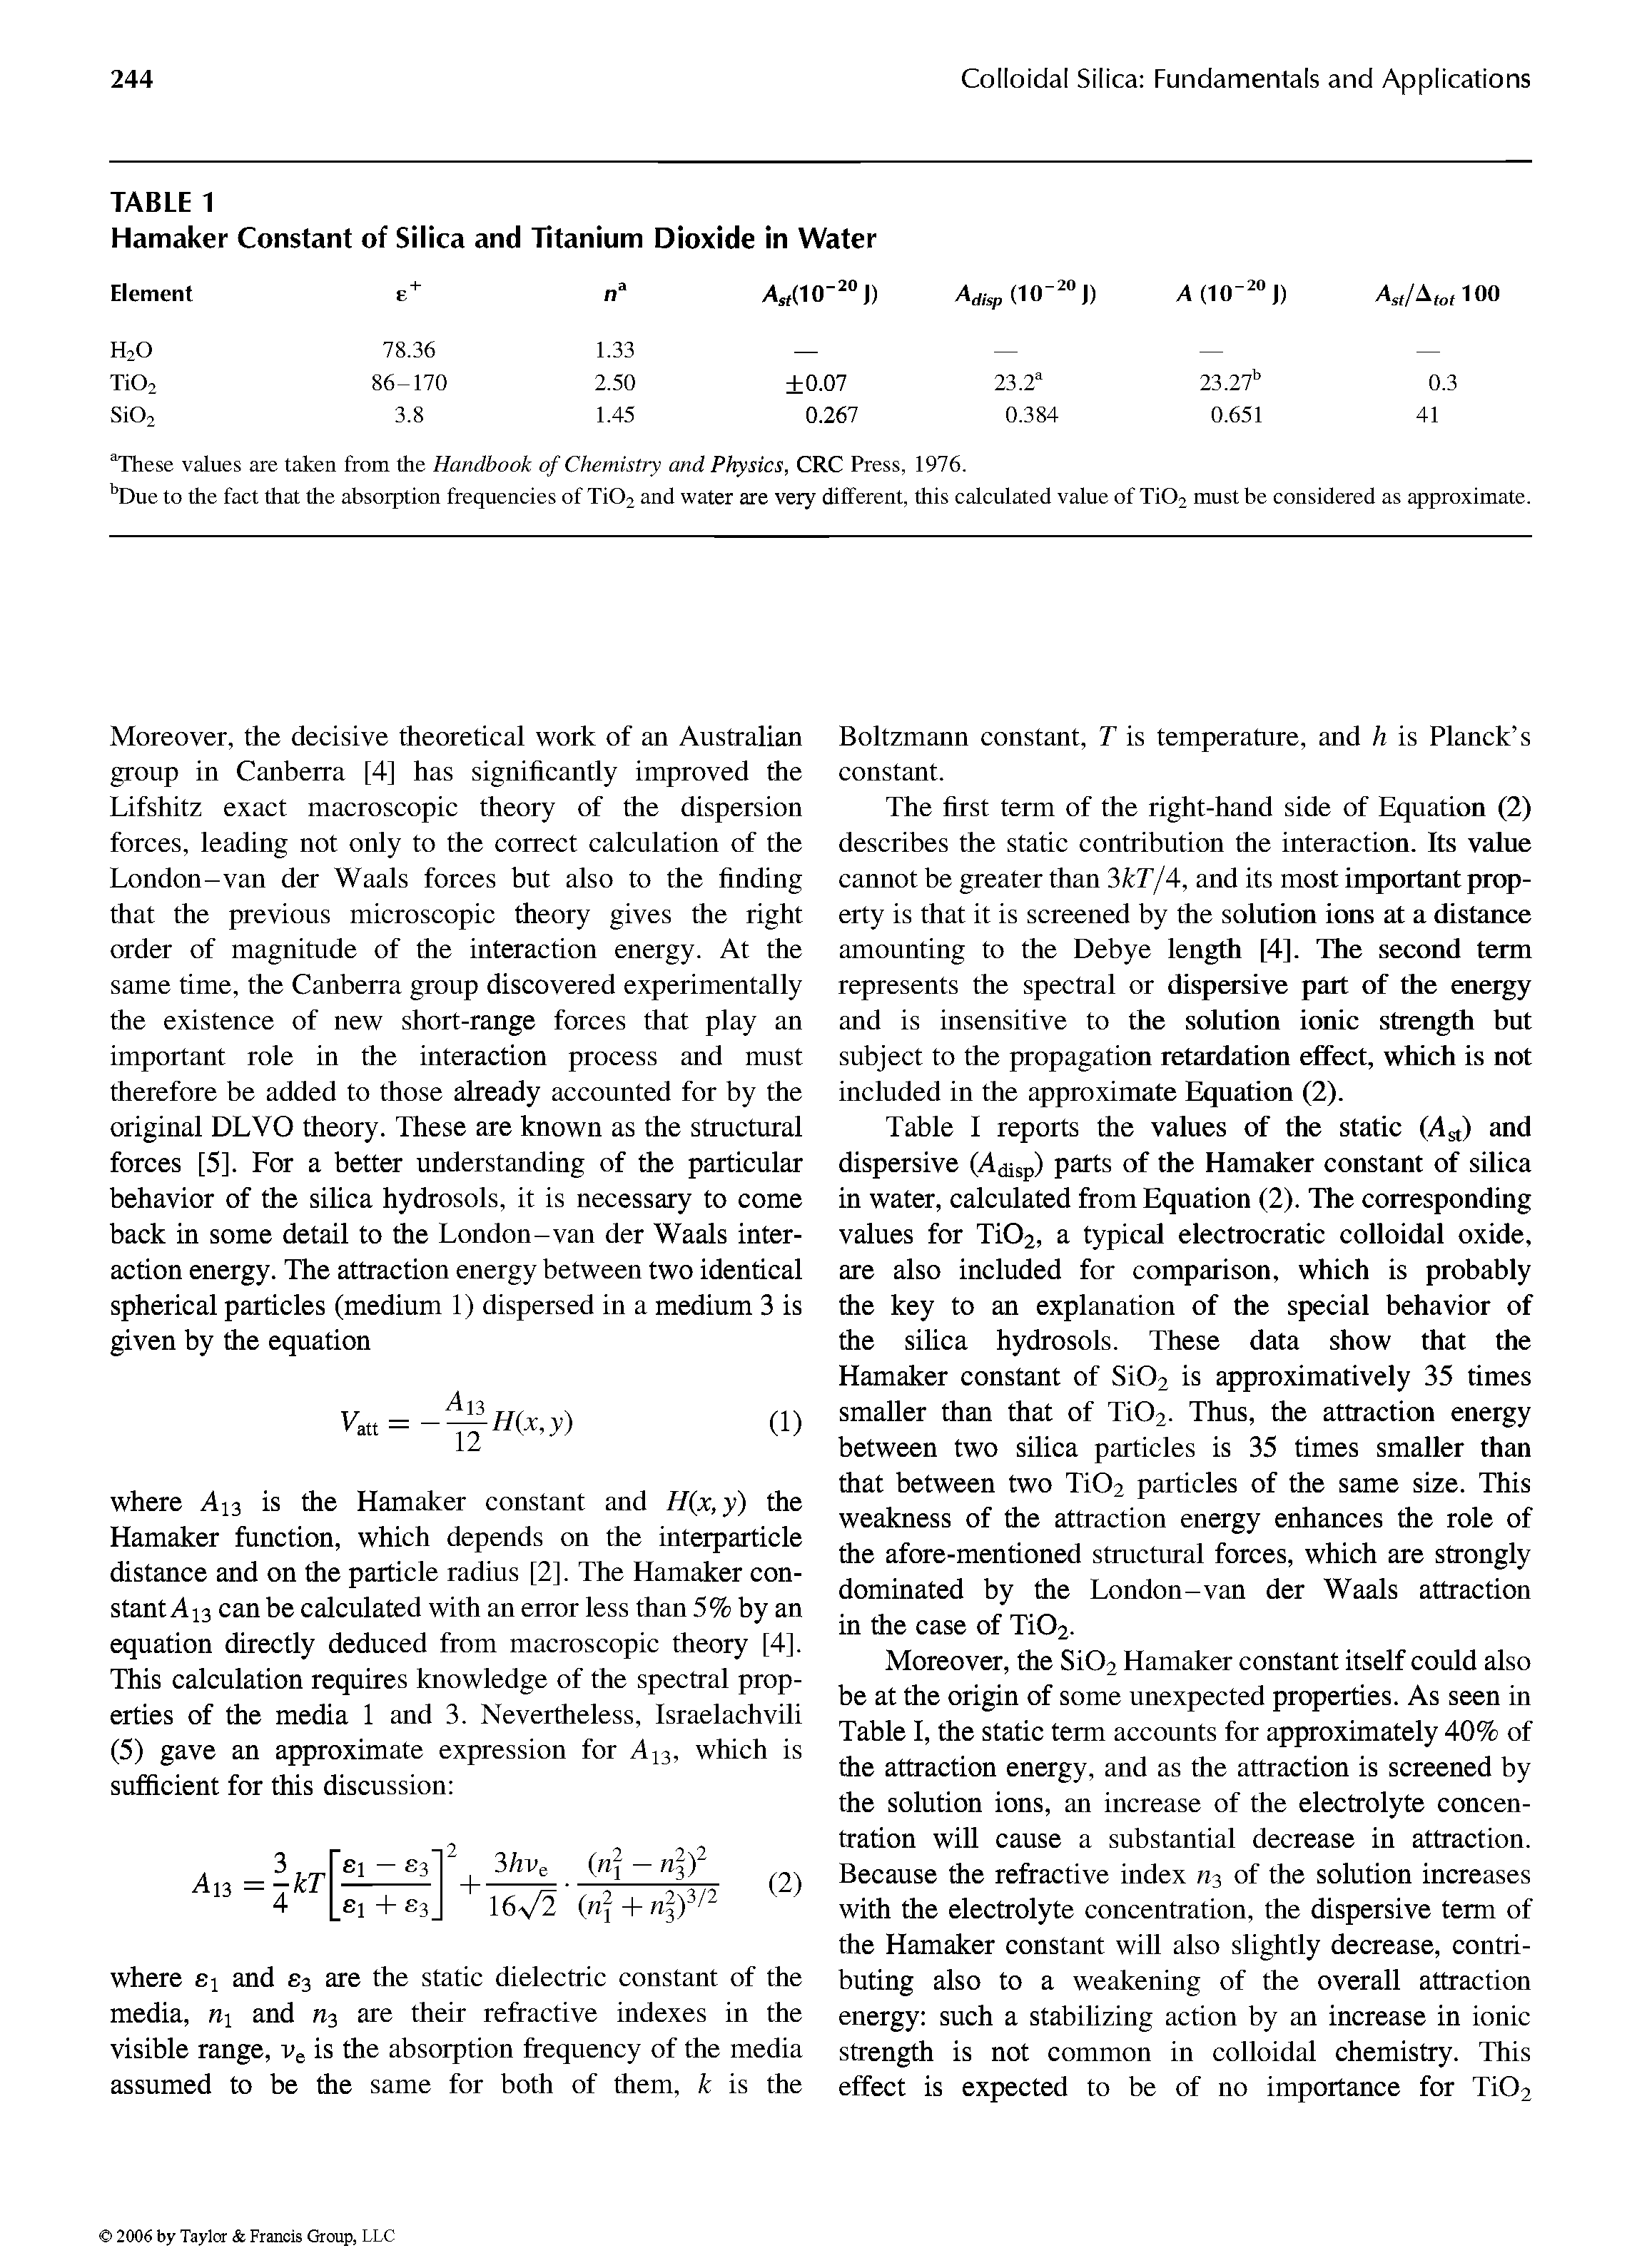 Table I reports the values of the static (Agt) and dispersive (Ajisp) parts of the Hamaker constant of silica in water, calculated from Equation (2). The corresponding values for TiOa, a typical electrocratic colloidal oxide, are also included for comparison, which is probably the key to an explanation of the special behavior of the silica hydrosols. These data show that the Hamaker constant of Si02 is approximatively 35 times smaller than that of Ti02. Thus, the attraction energy between two silica particles is 35 times smaller than that between two Ti02 particles of the same size. This weakness of the attraction energy enhances the role of the afore-mentioned structural forces, which are strongly dominated by the London-van der Waals attraction in the case of Ti02.